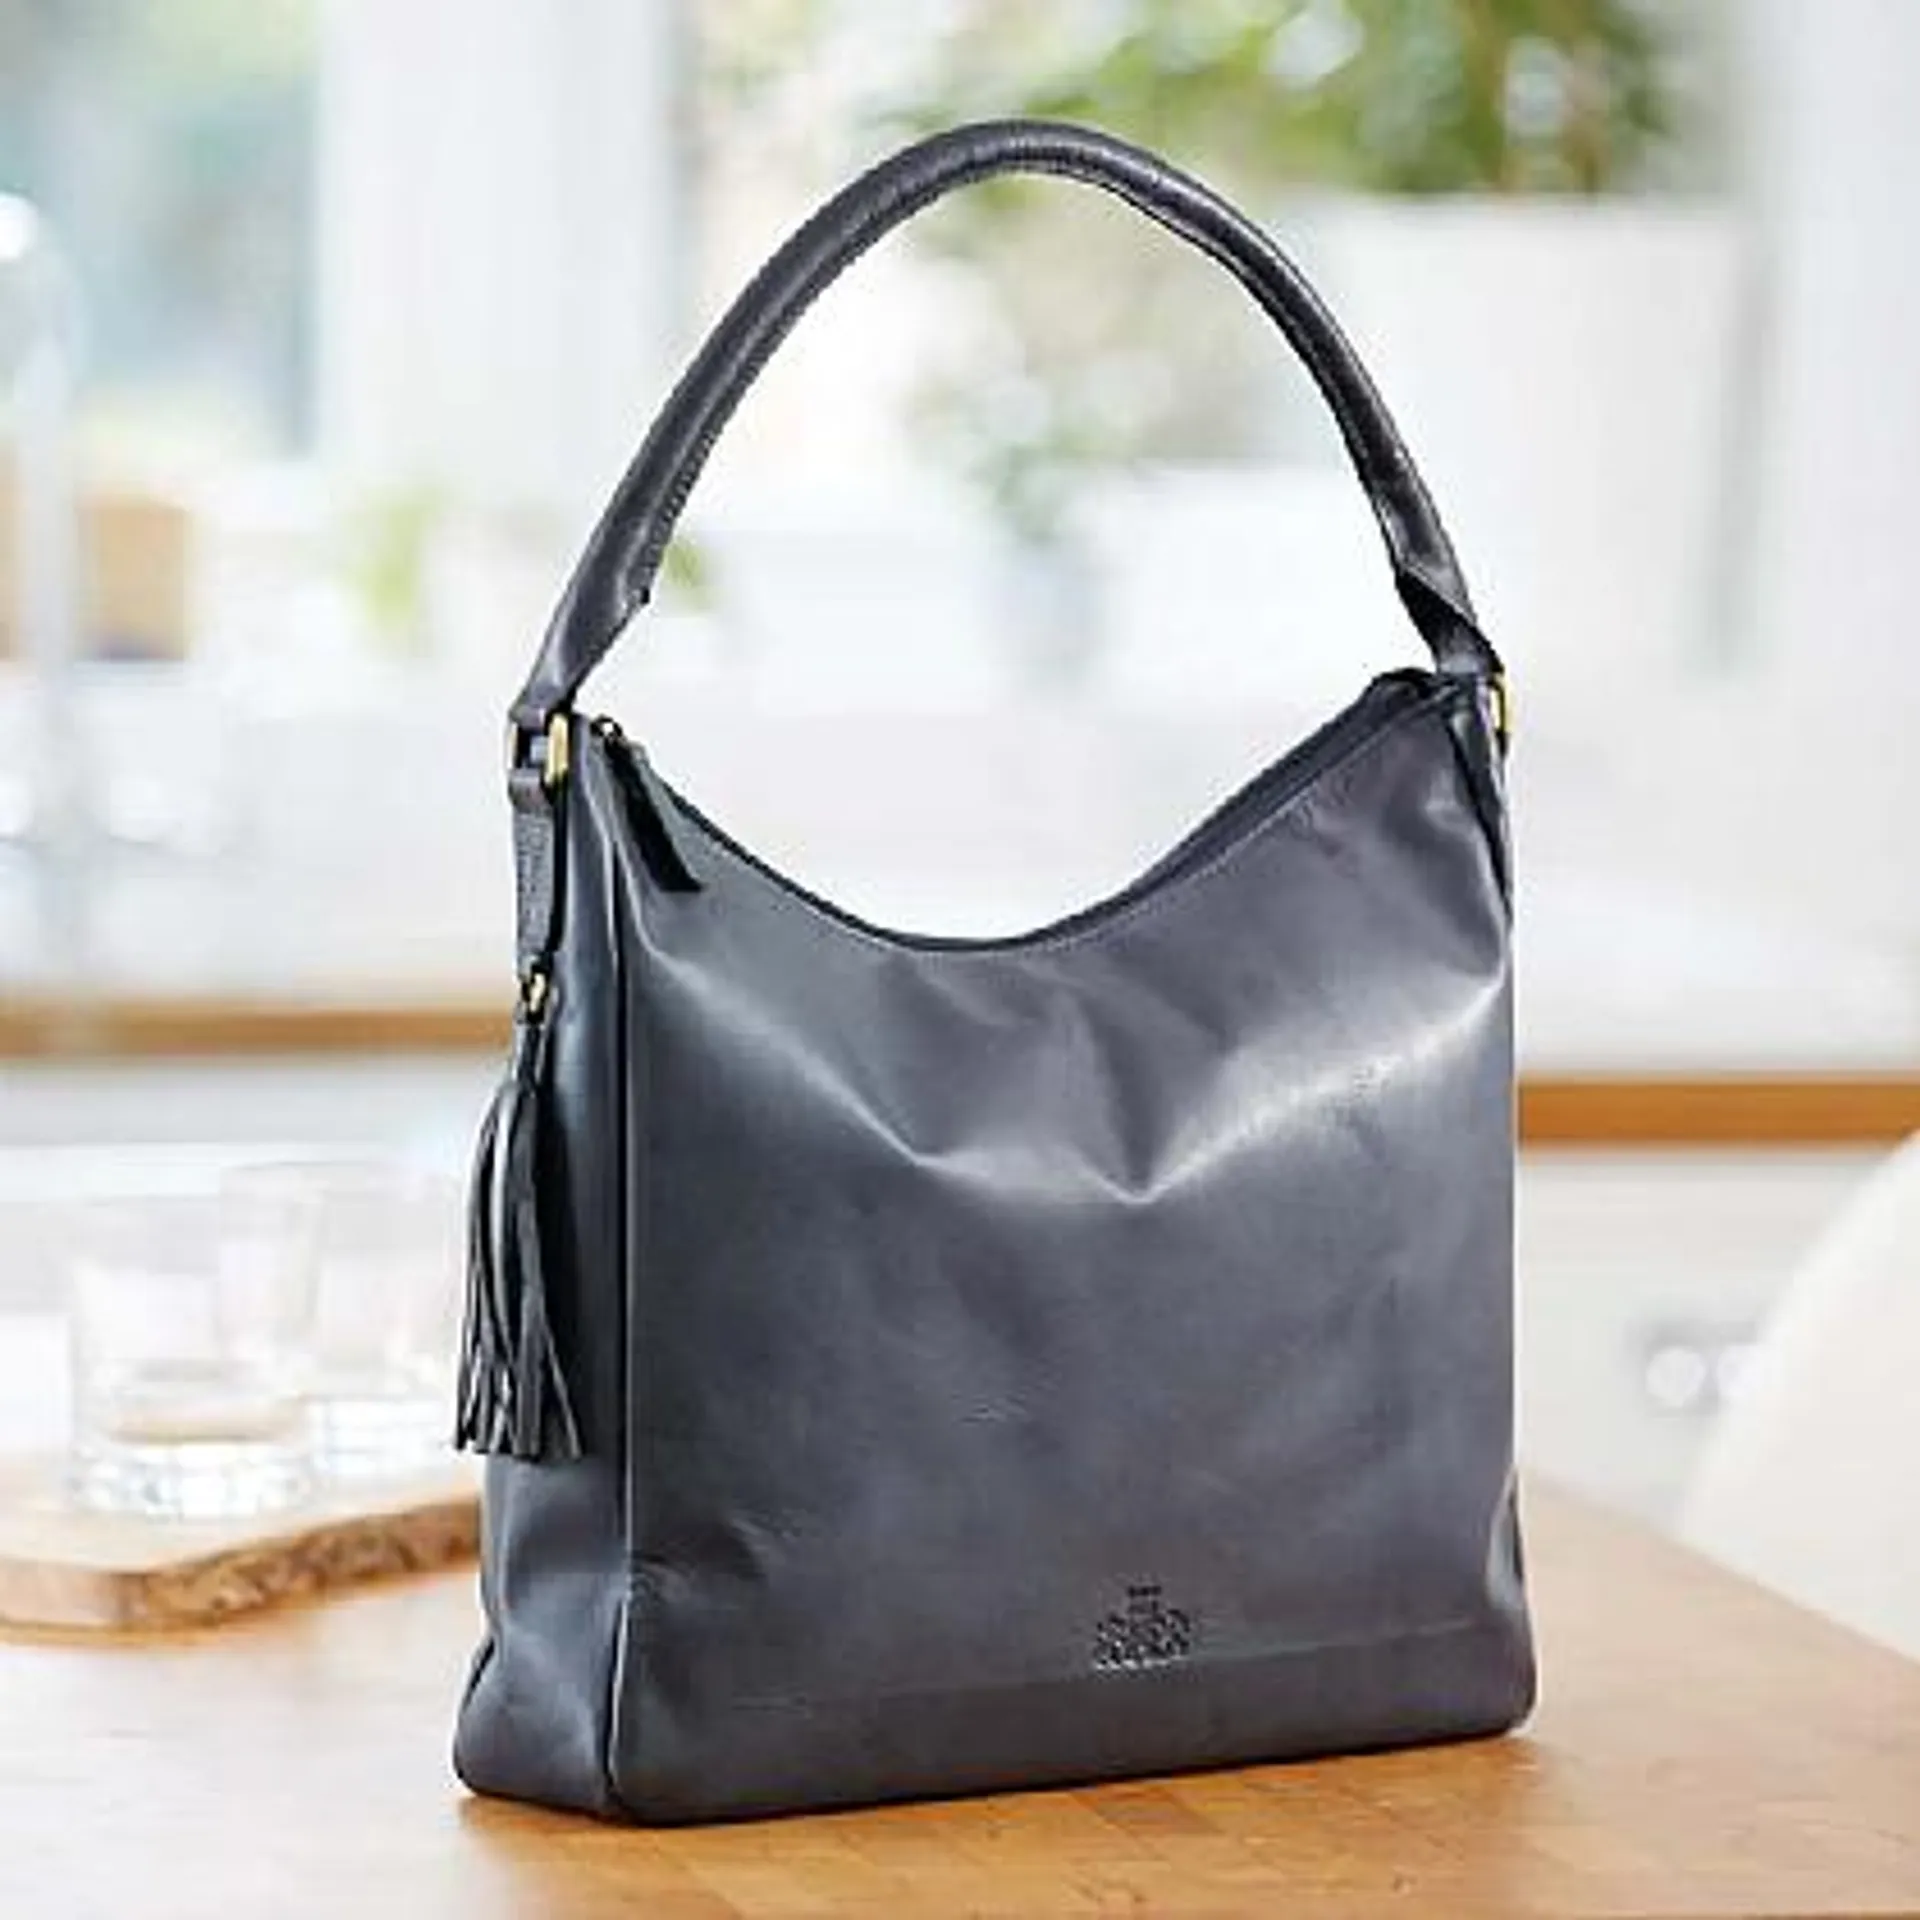 Never Dull in Navy Leather Bag